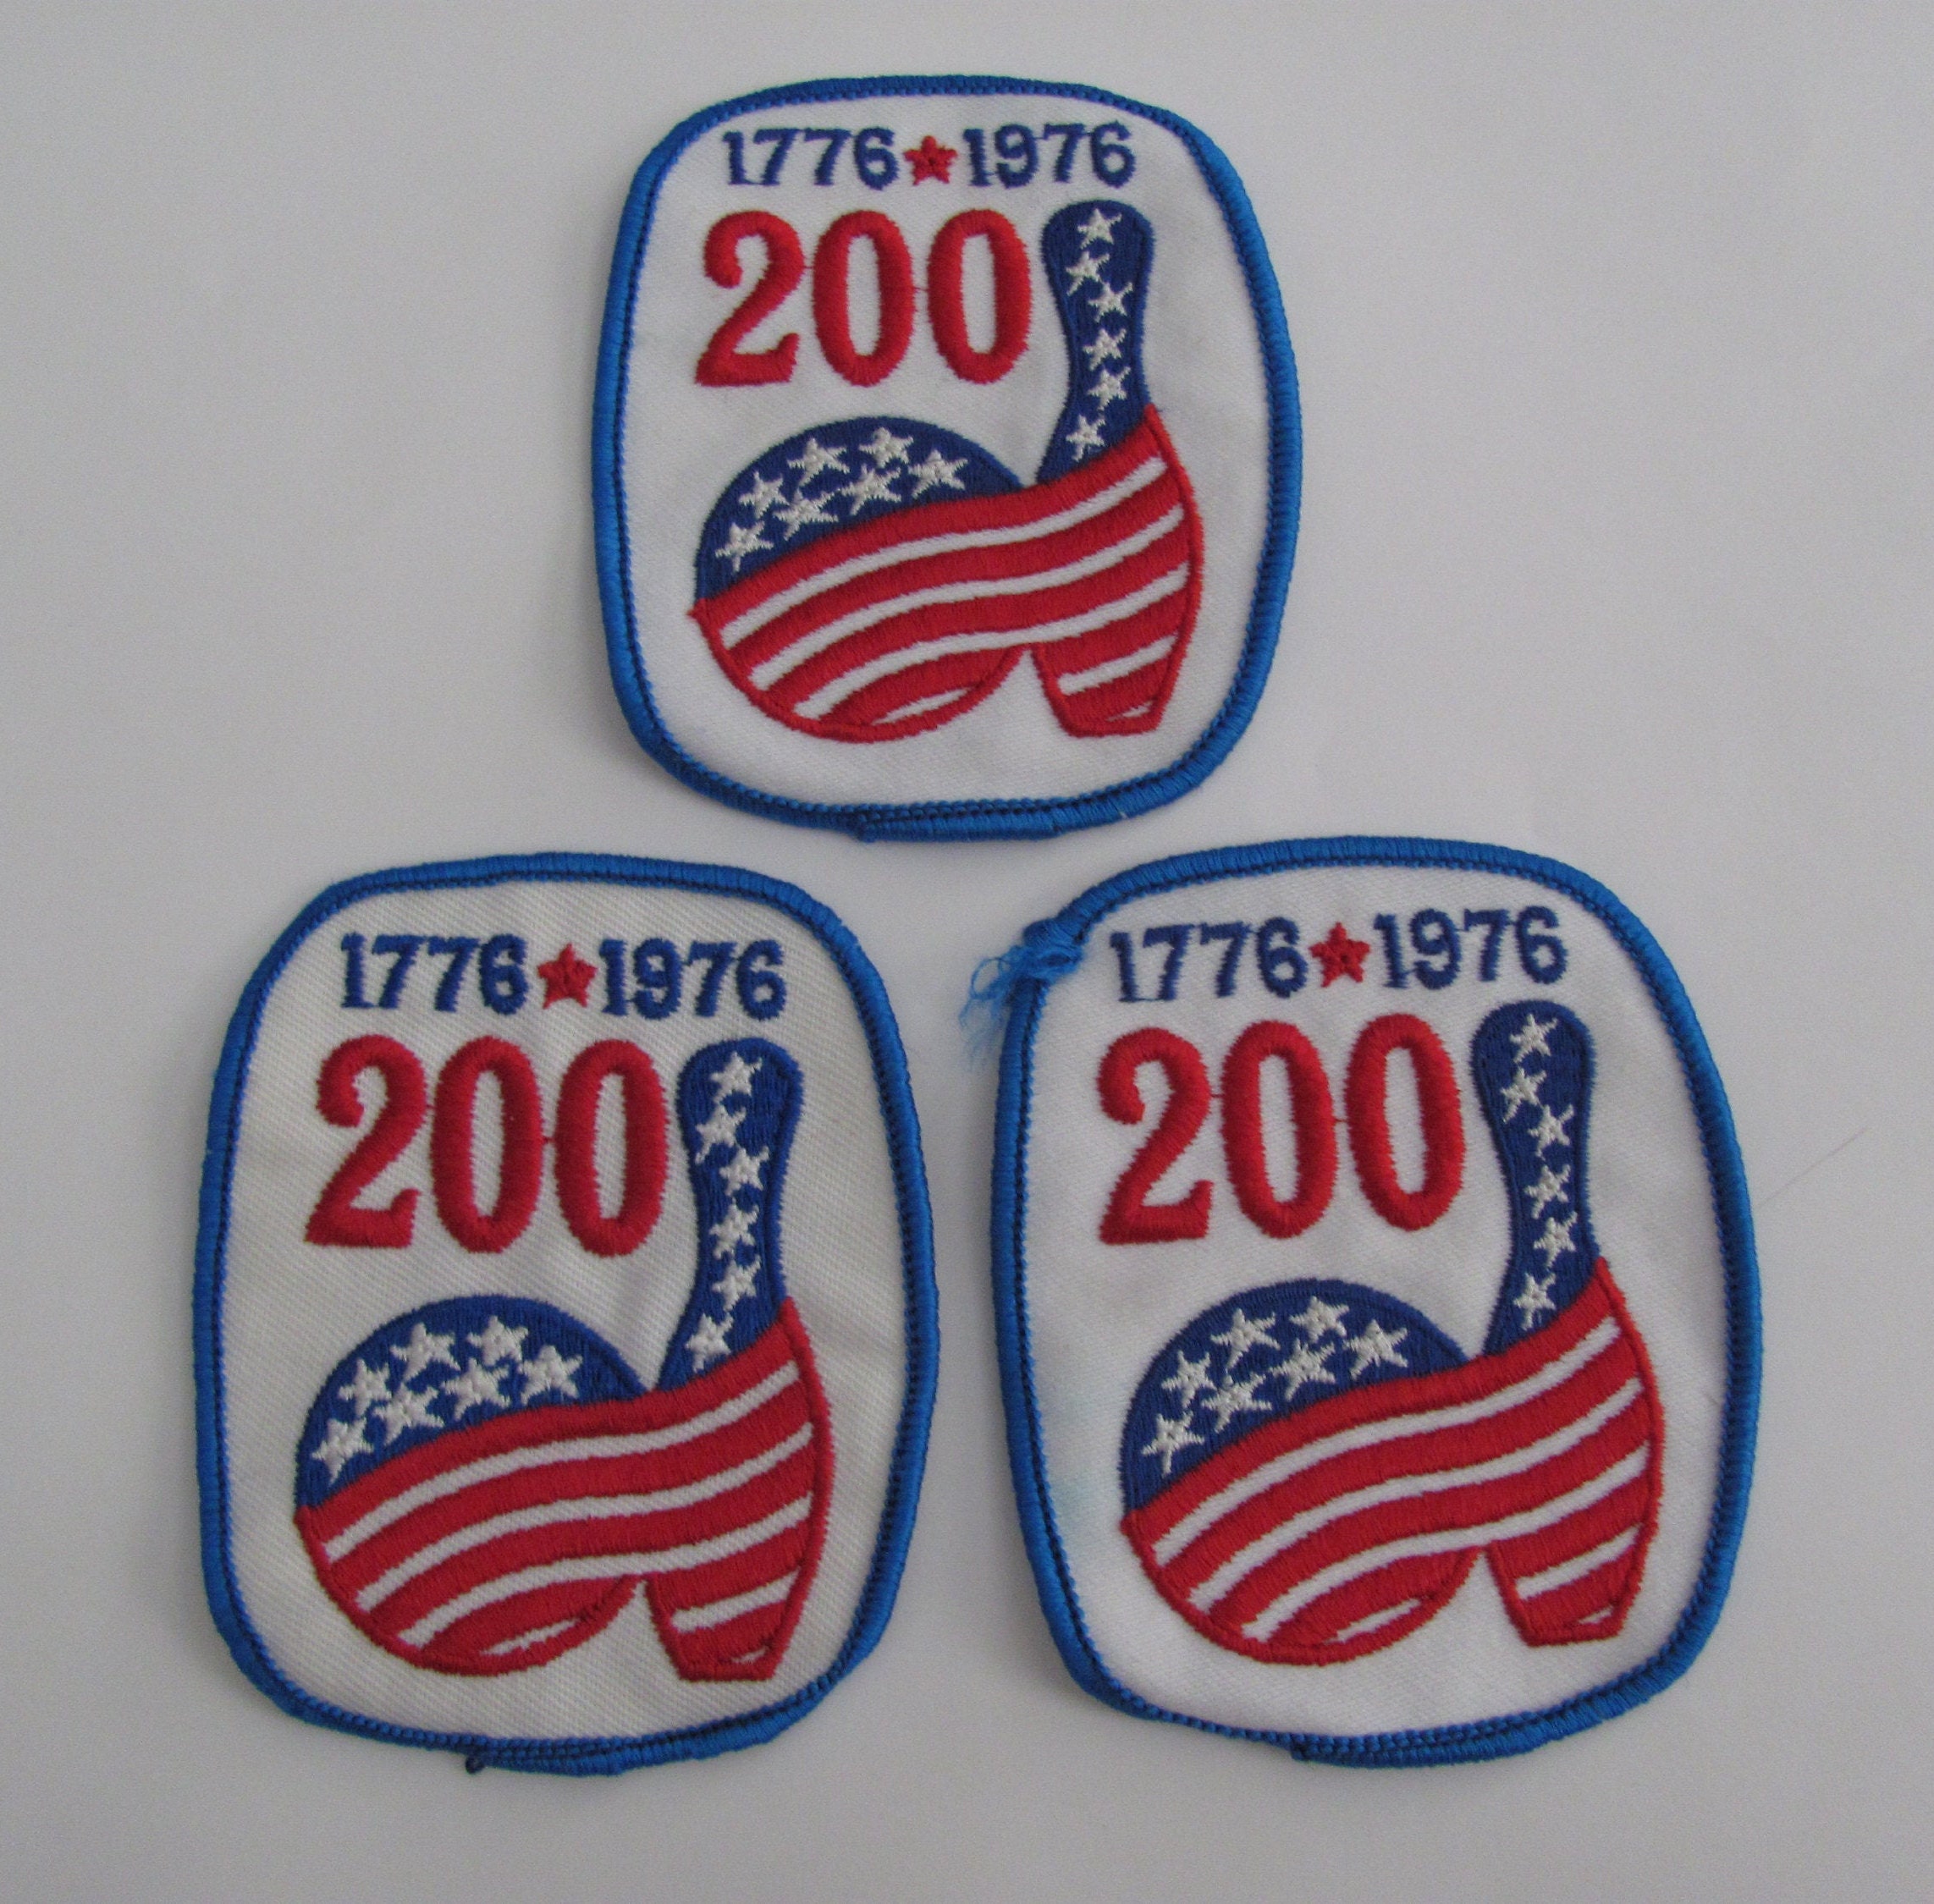 America Bicentennial Sew-on Vintage Embroidered Patch USA Patriotic 1776-1976 